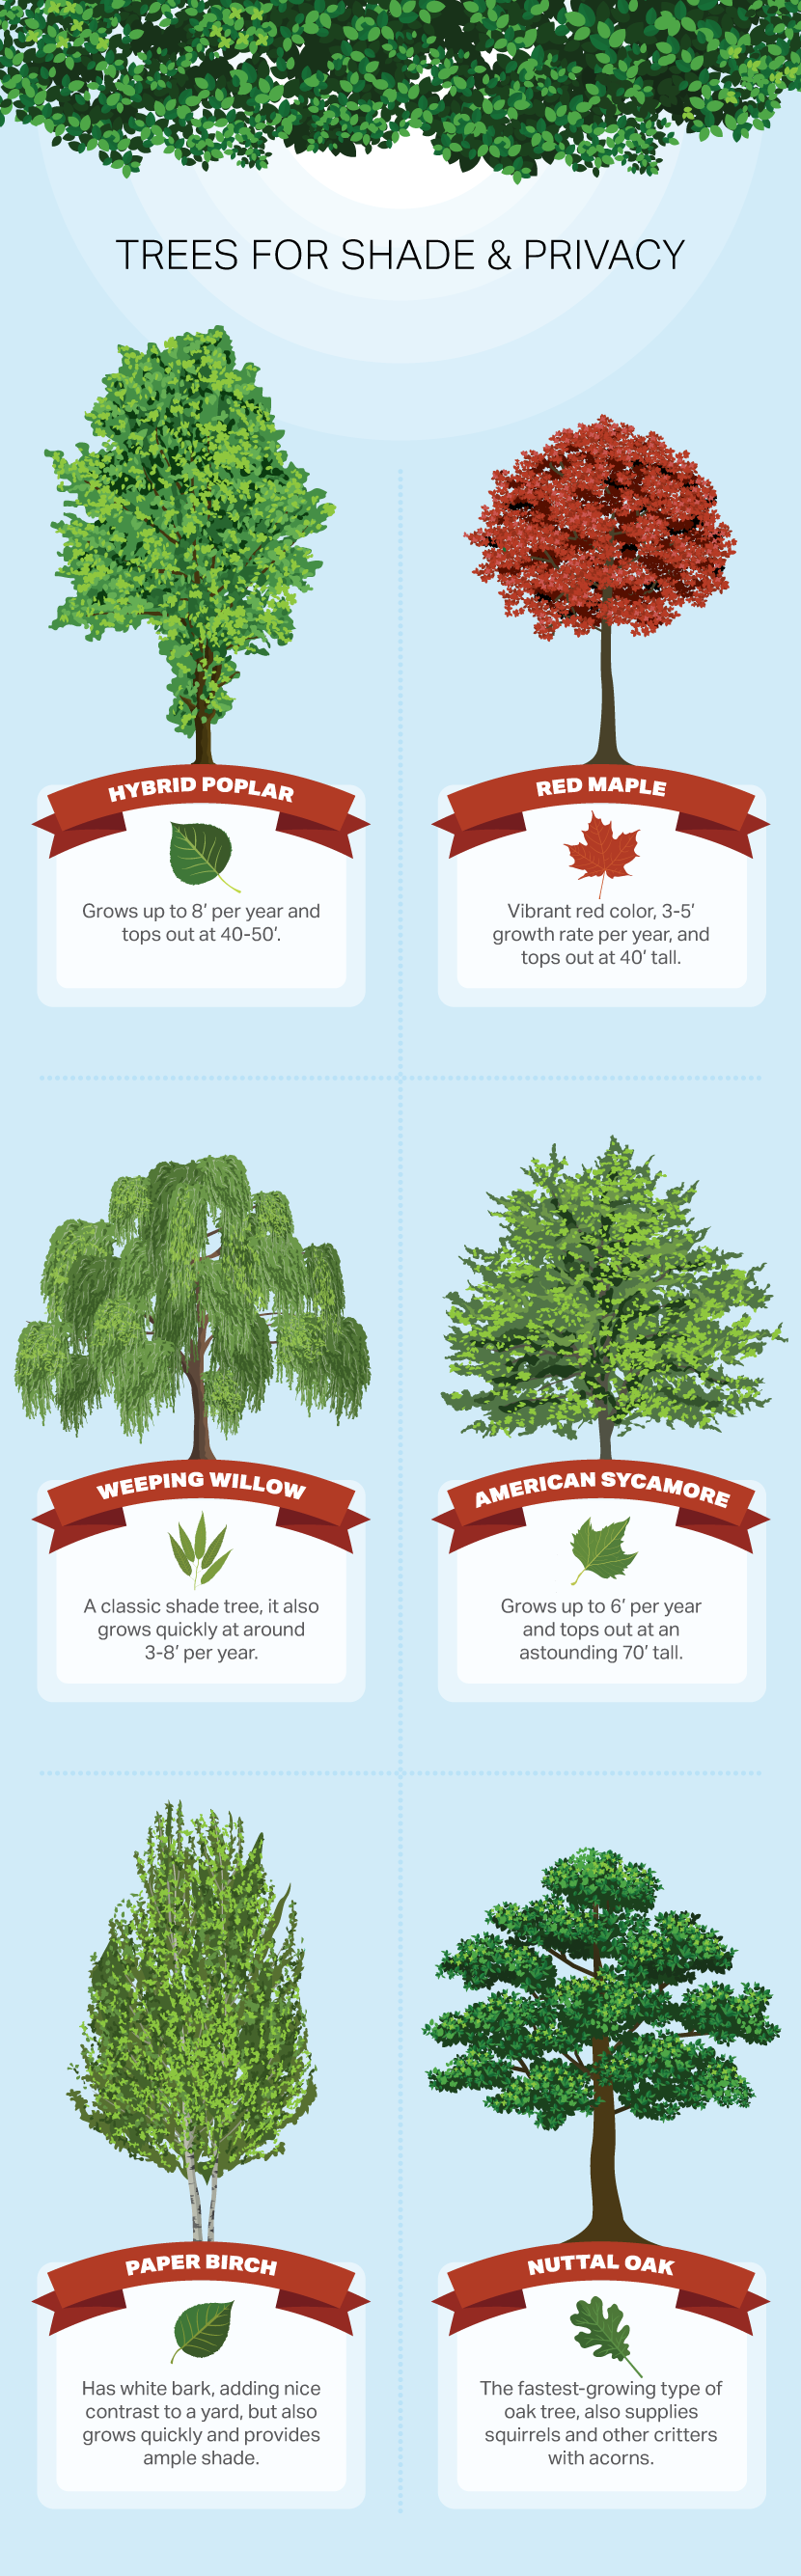 Trees For Shade and Privacy - How to Choose a Tree For Your Yard or Garden